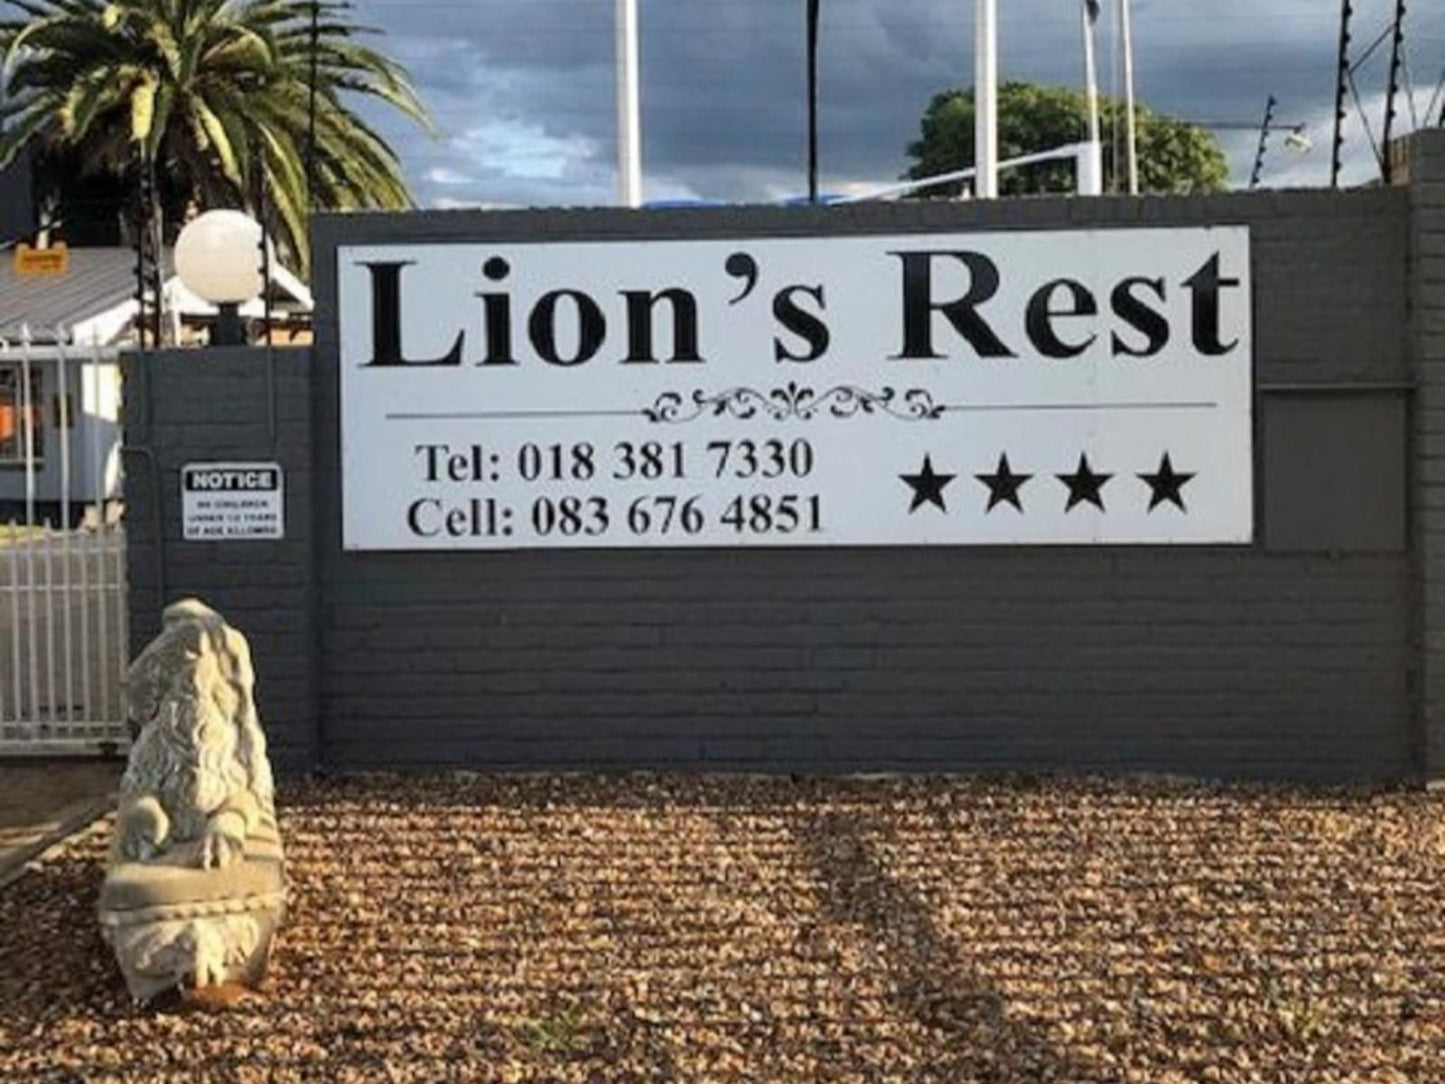 Lion S Rest Guest House Mahikeng North West Province South Africa Lion, Mammal, Animal, Big Cat, Predator, Sign, Window, Architecture